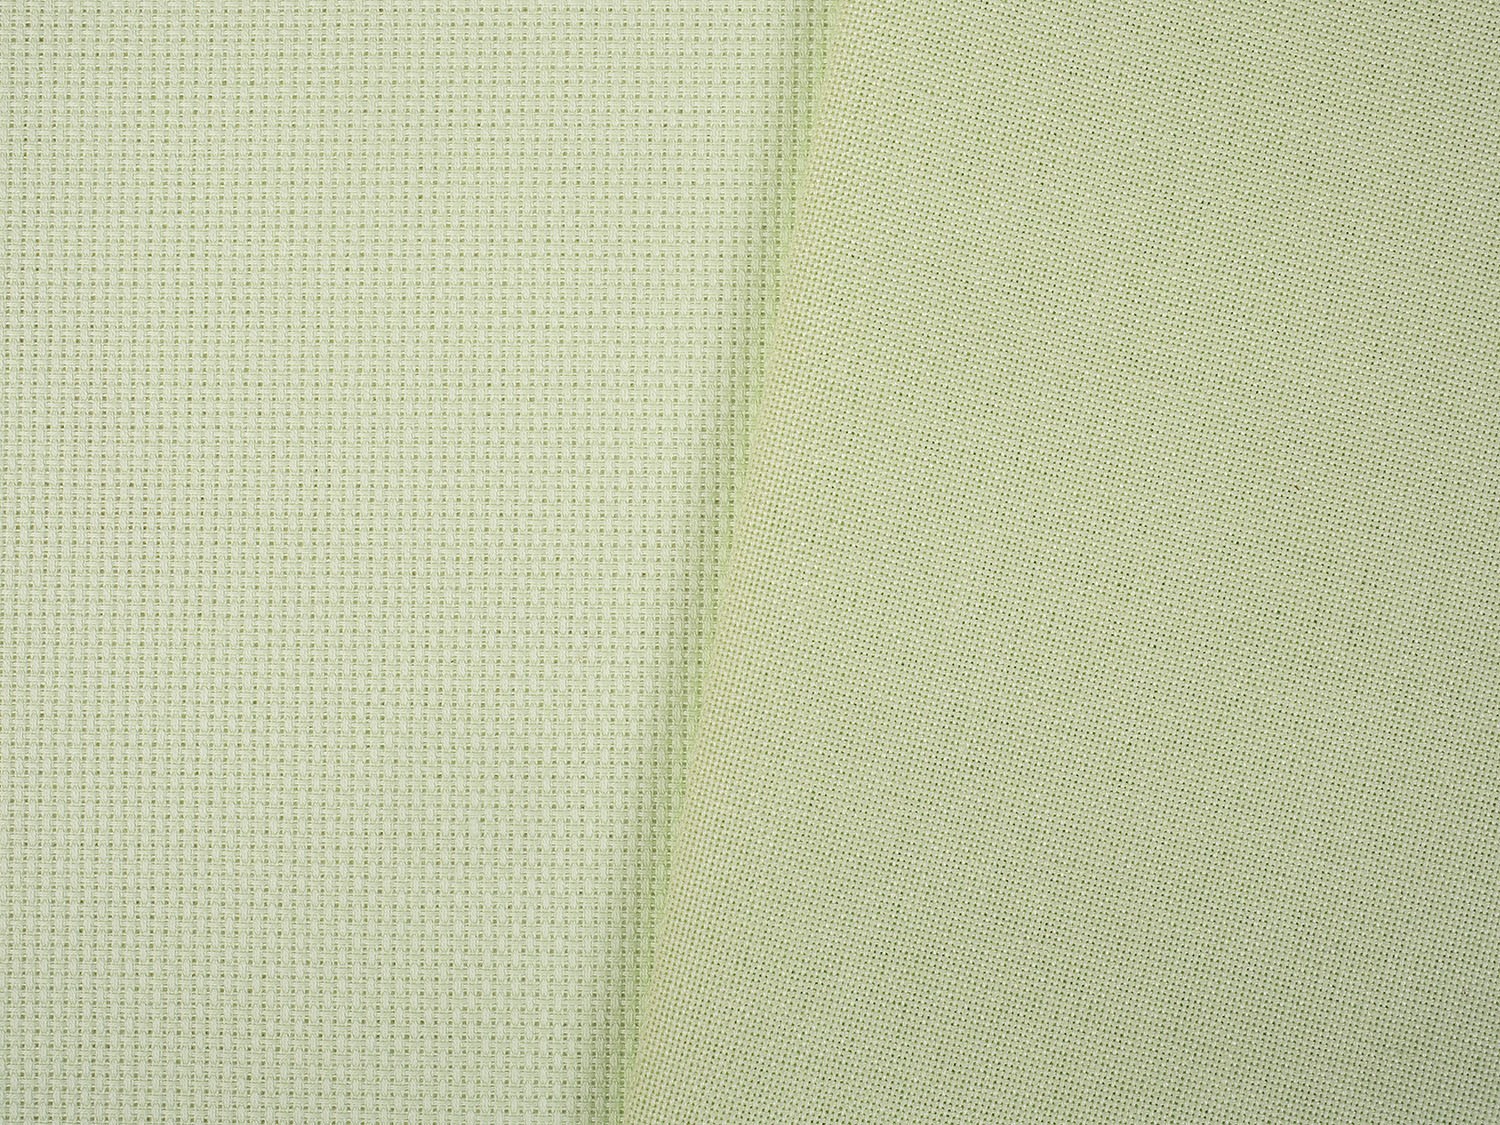 Fabric of the Month - June 24 - Shade of Apple Green